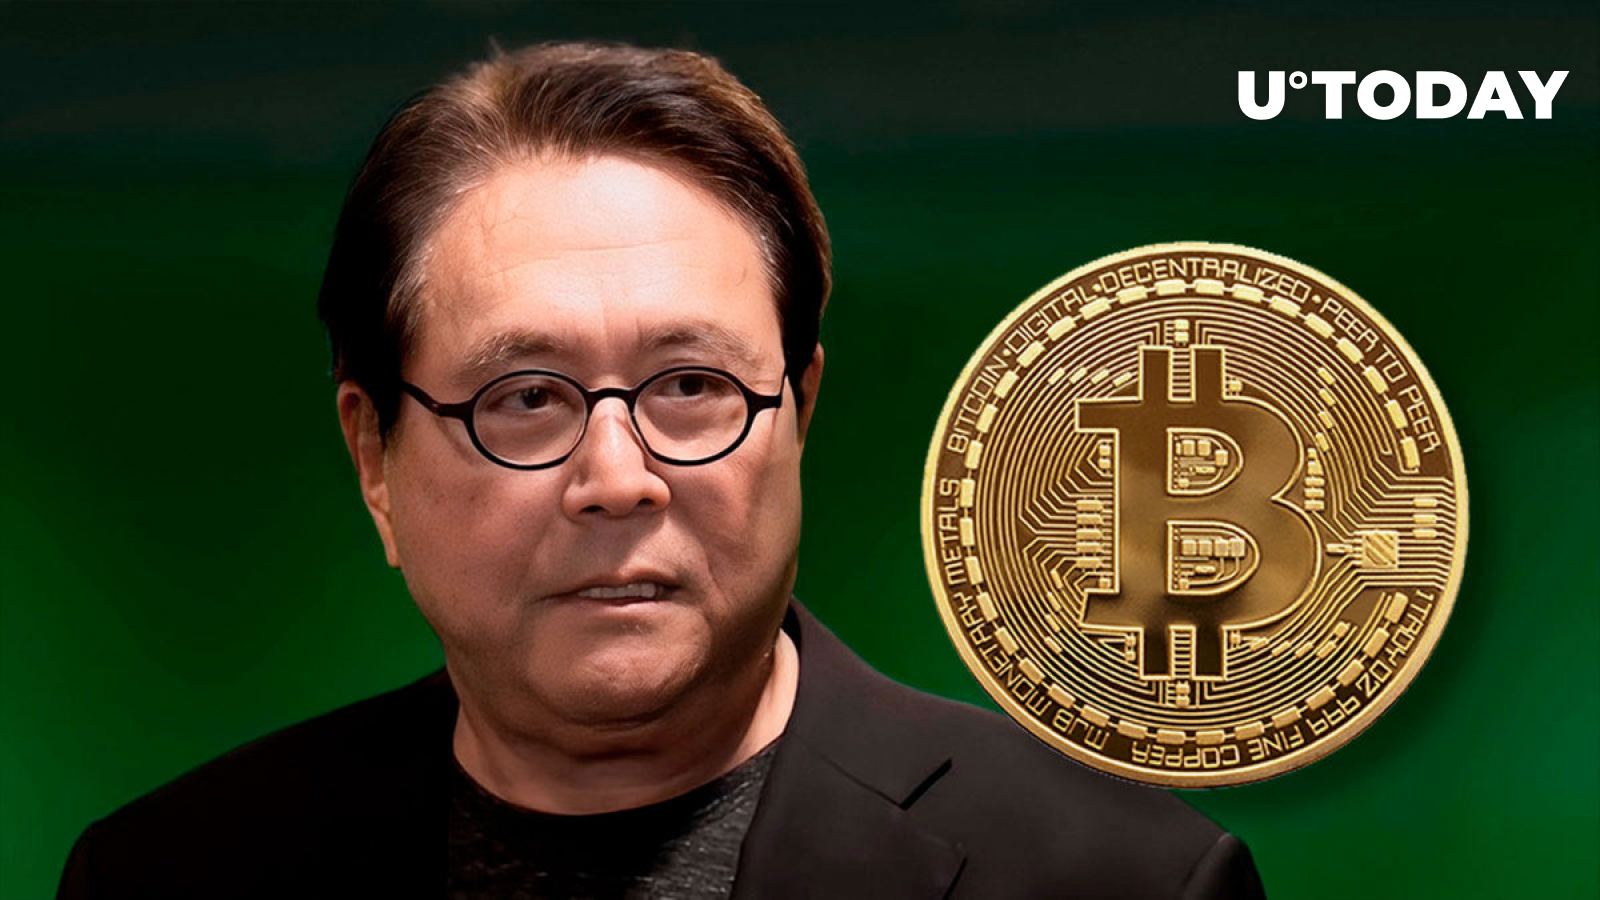 ‘Rich Dad Poor Dad’ Author Says Rising Stock Market Will Not Save US Economy, Still Bets on Bitcoin